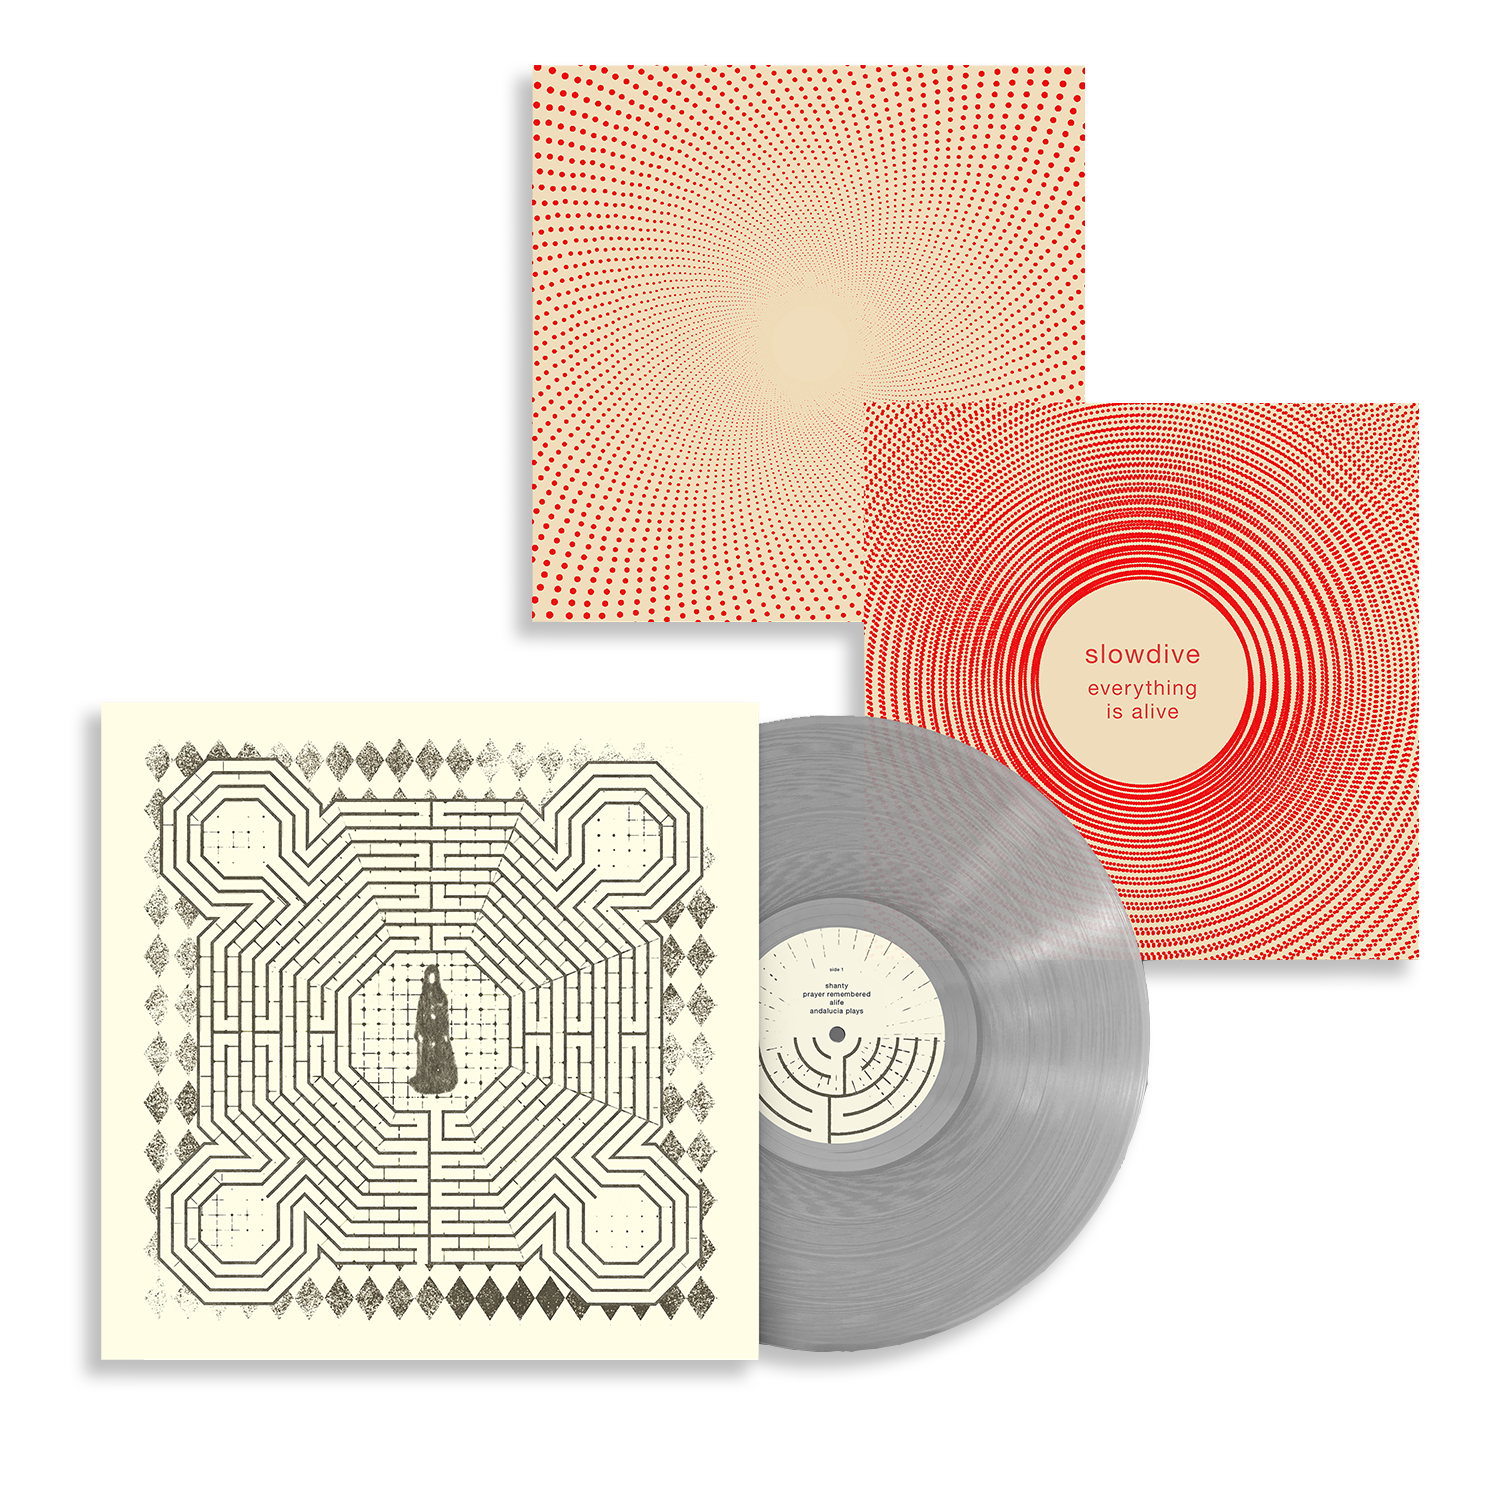 everything is alive: Limited Translucent Clear Vinyl LP + Exclusive Print